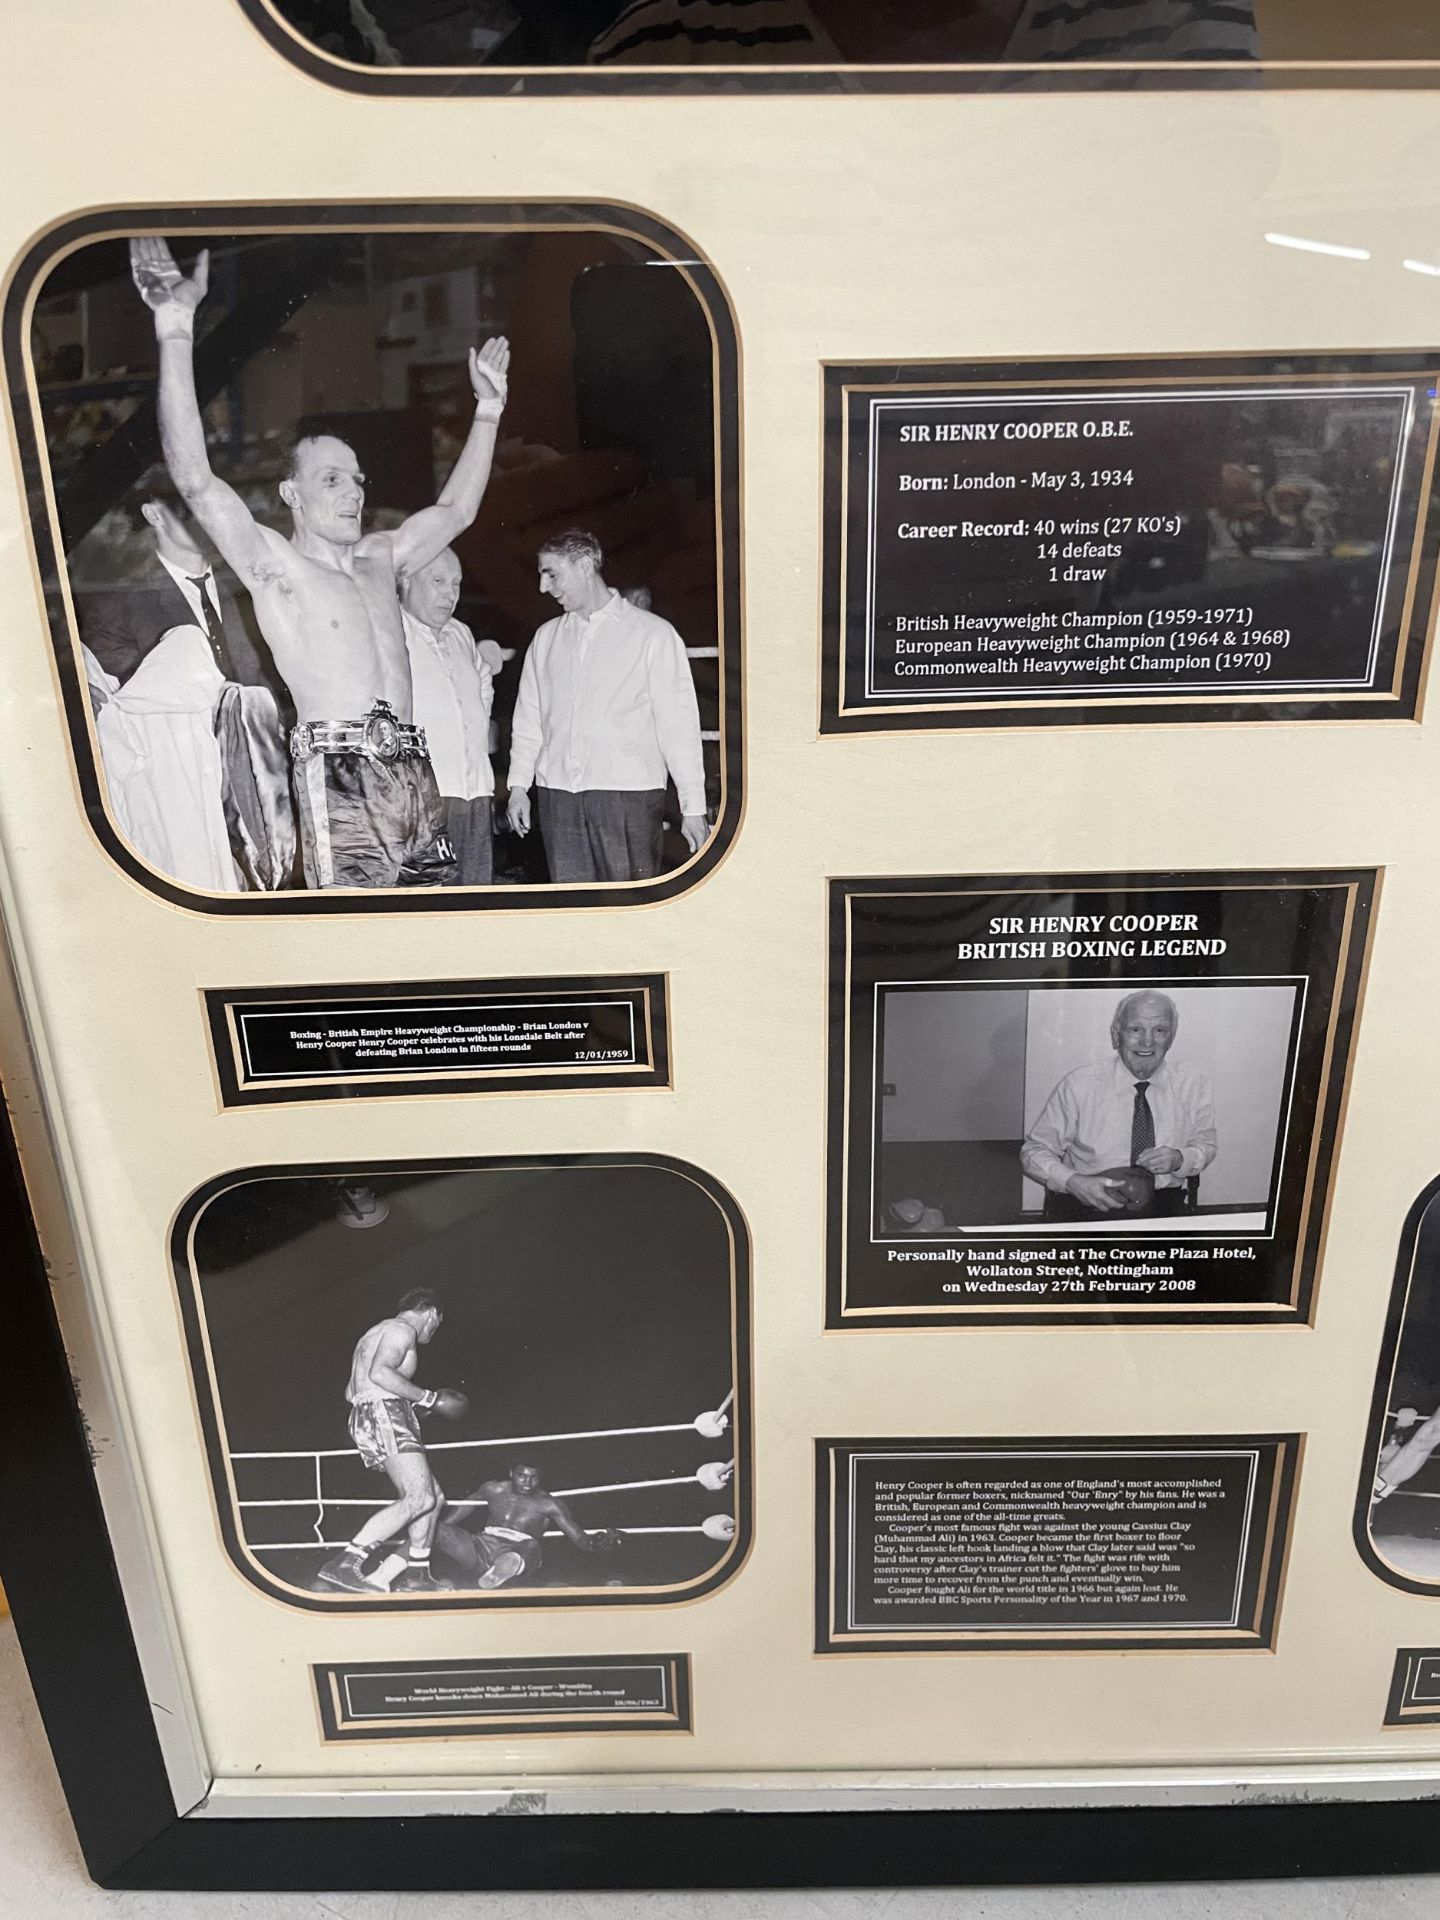 A FRAMED SIR HENRY COOPER O.B.E BOXING MONTAGE WITH SIGNED BOXING GLOVE AND PHOTOS - Image 3 of 4